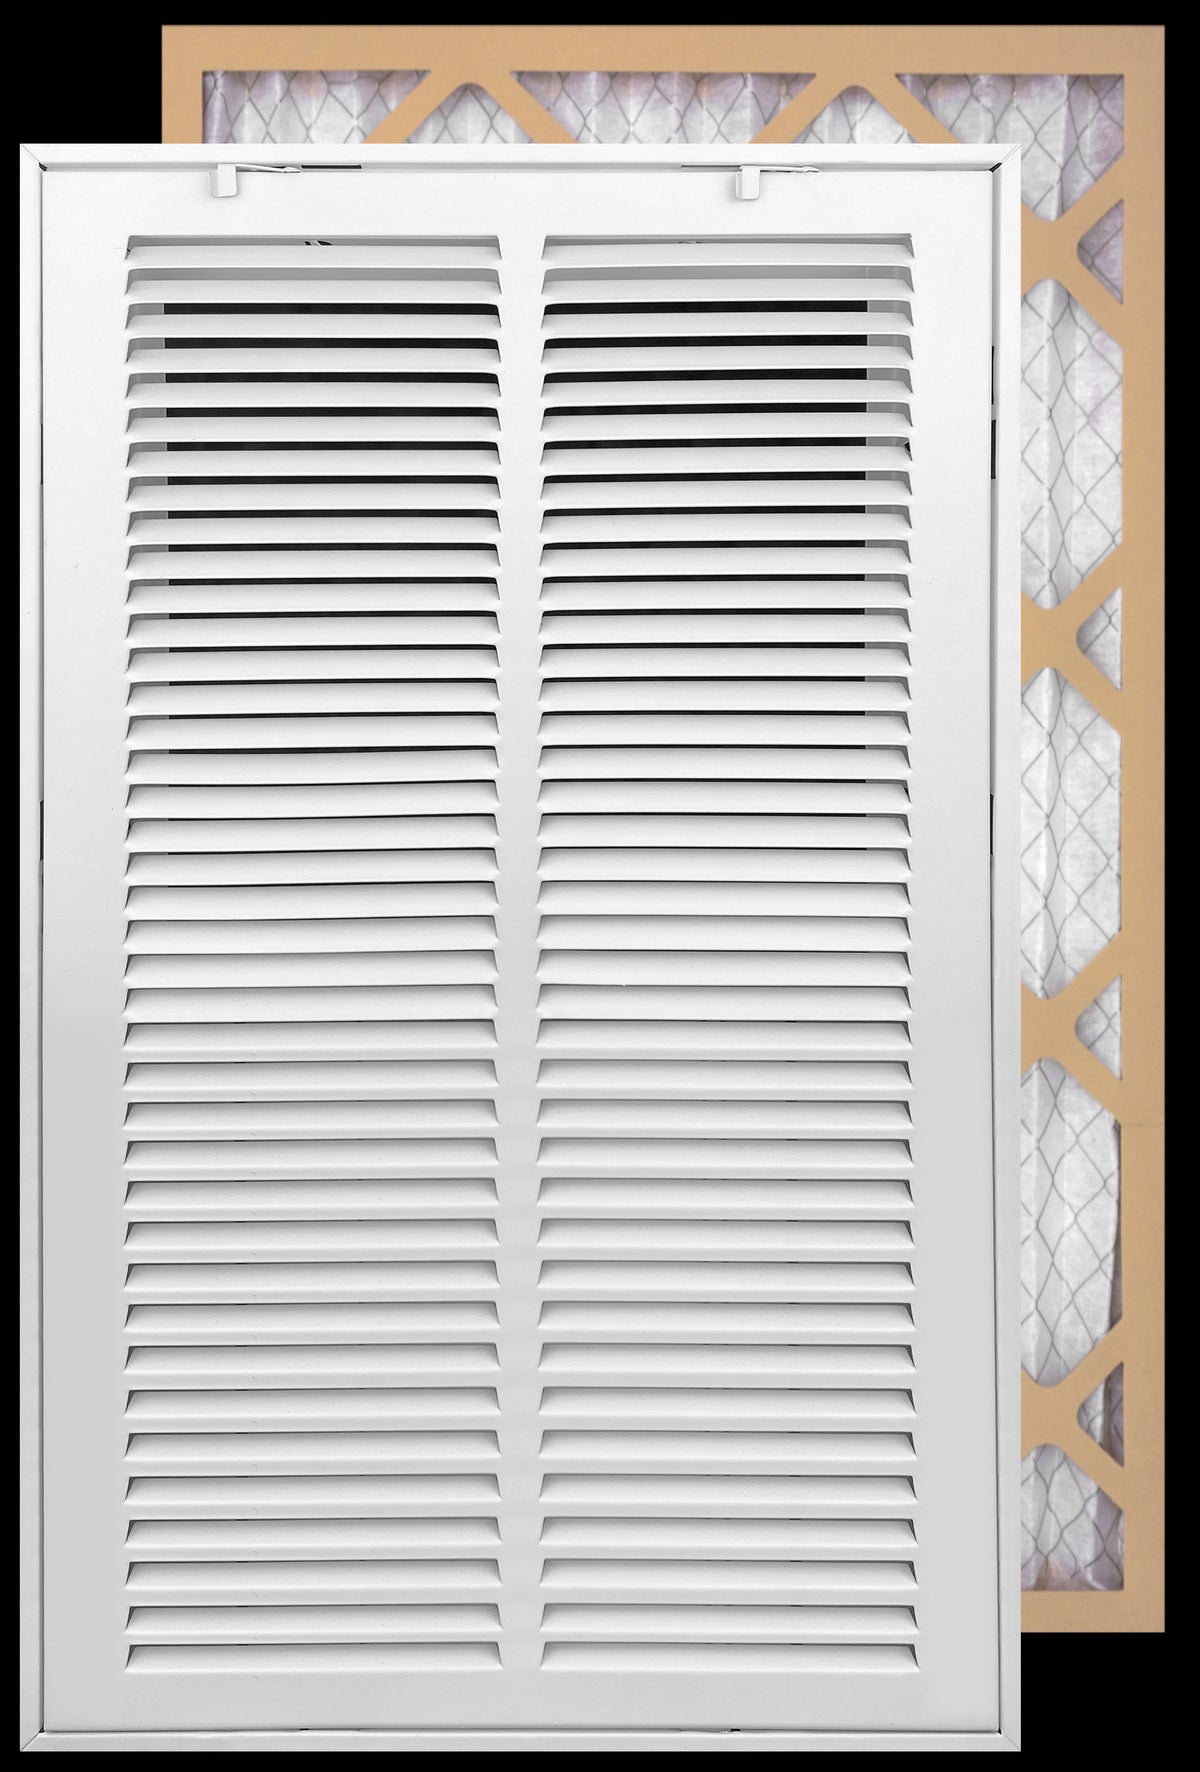 airgrilles 14" x 24" duct opening  -  filter included hd steel return air filter grille for sidewall and ceiling fil-7rafg1-wh-14x24 038775643870 - 1